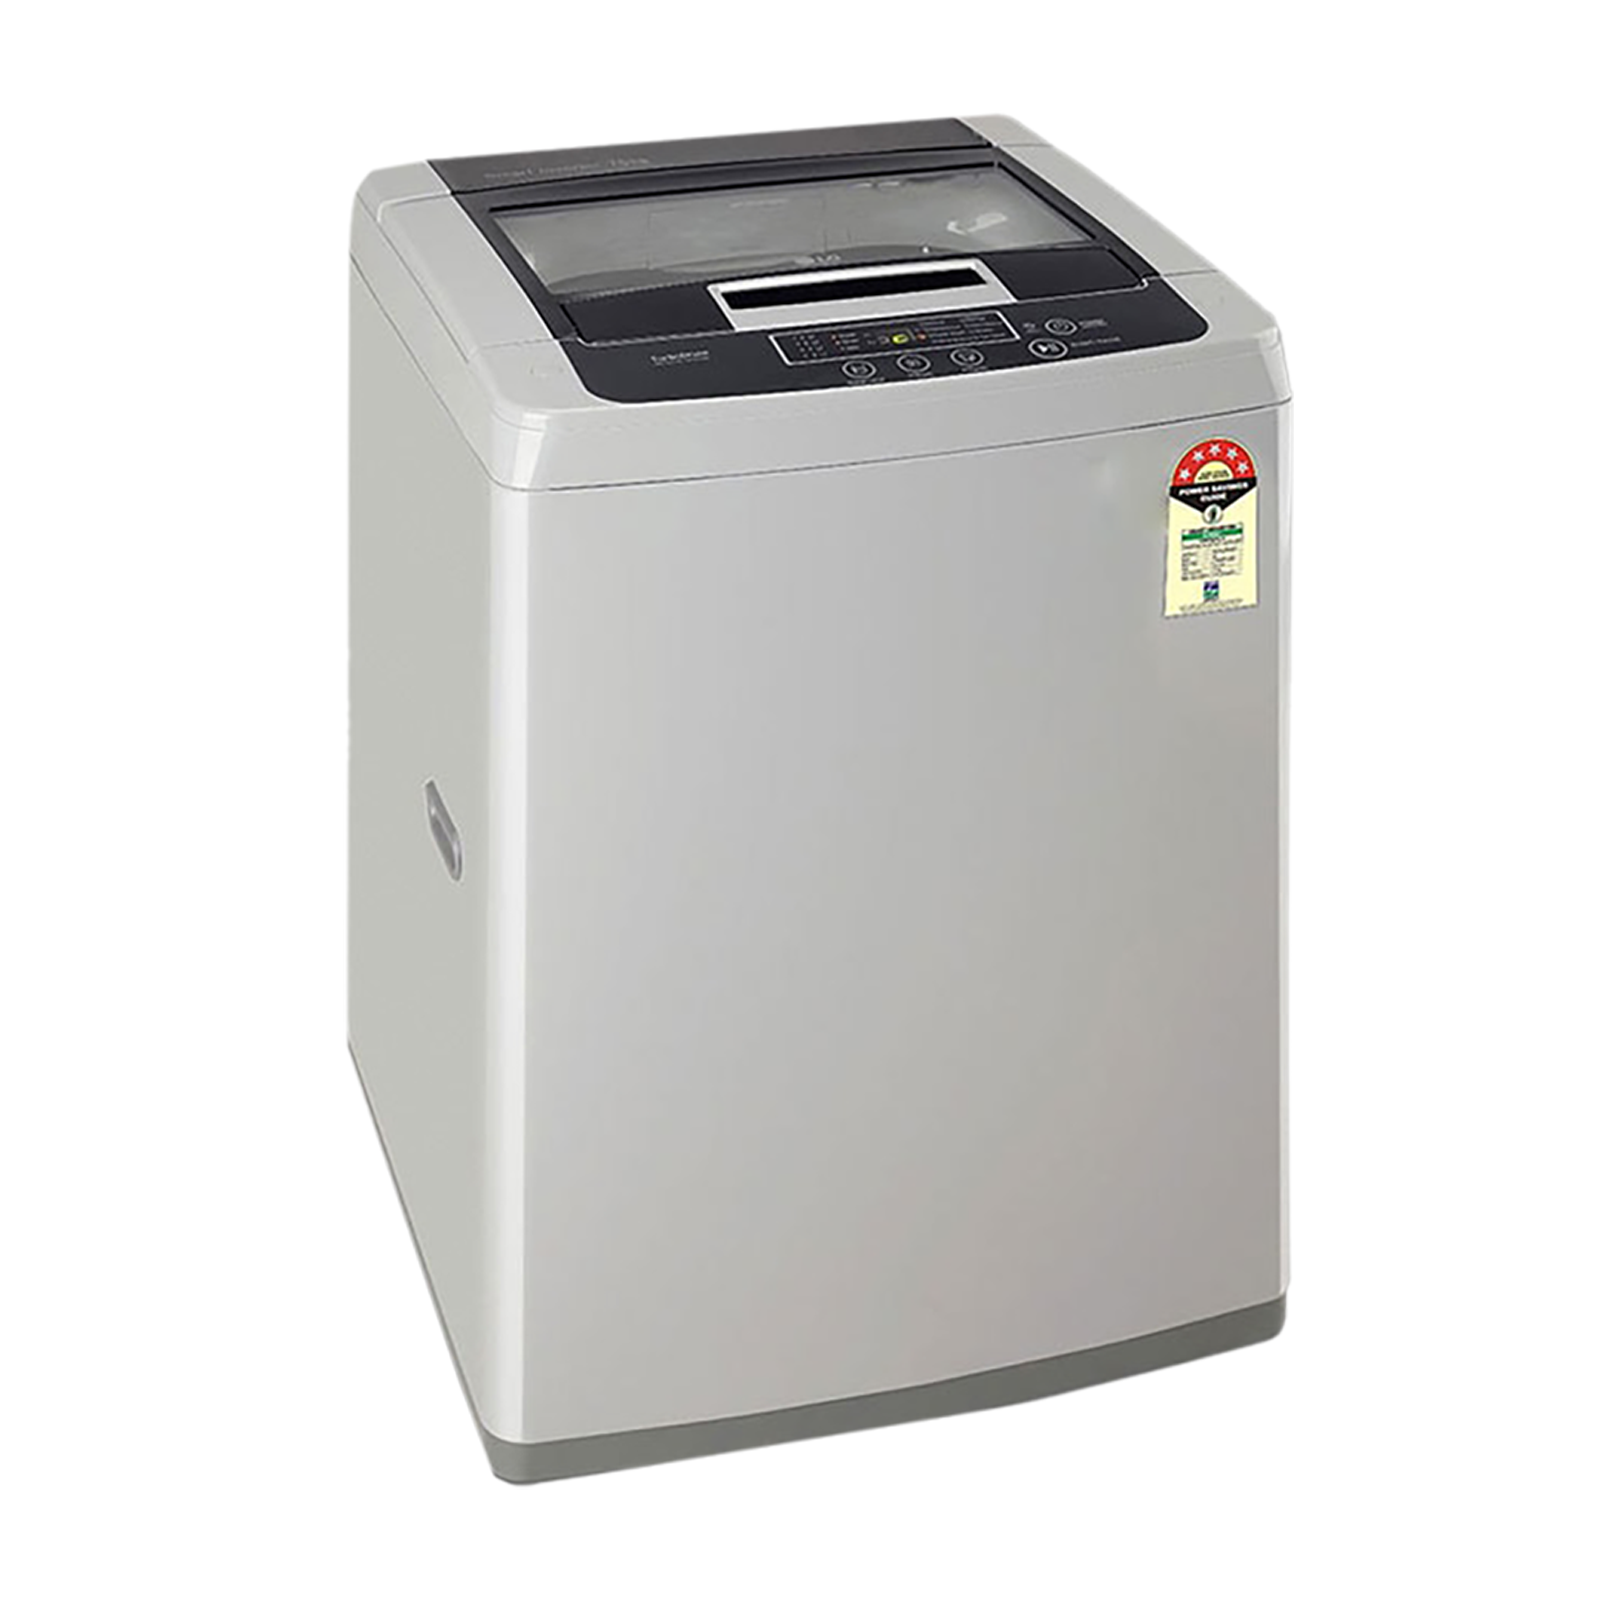 Buy LG 7.5 kg 5 Star Inverter Fully Automatic Top Load Washing Machine  (T75SKSF1Z.ASFQEIL, TurboDrum, Middle Free Silver) Online - Croma